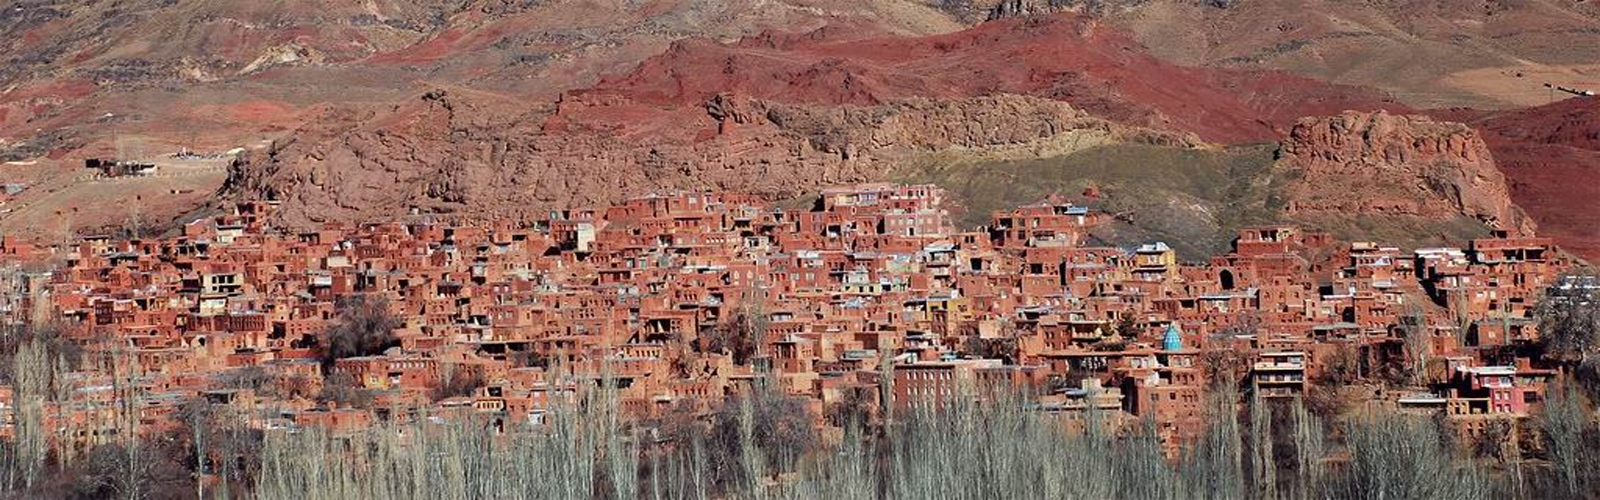 This red clay village in Iran is an anthropological museum